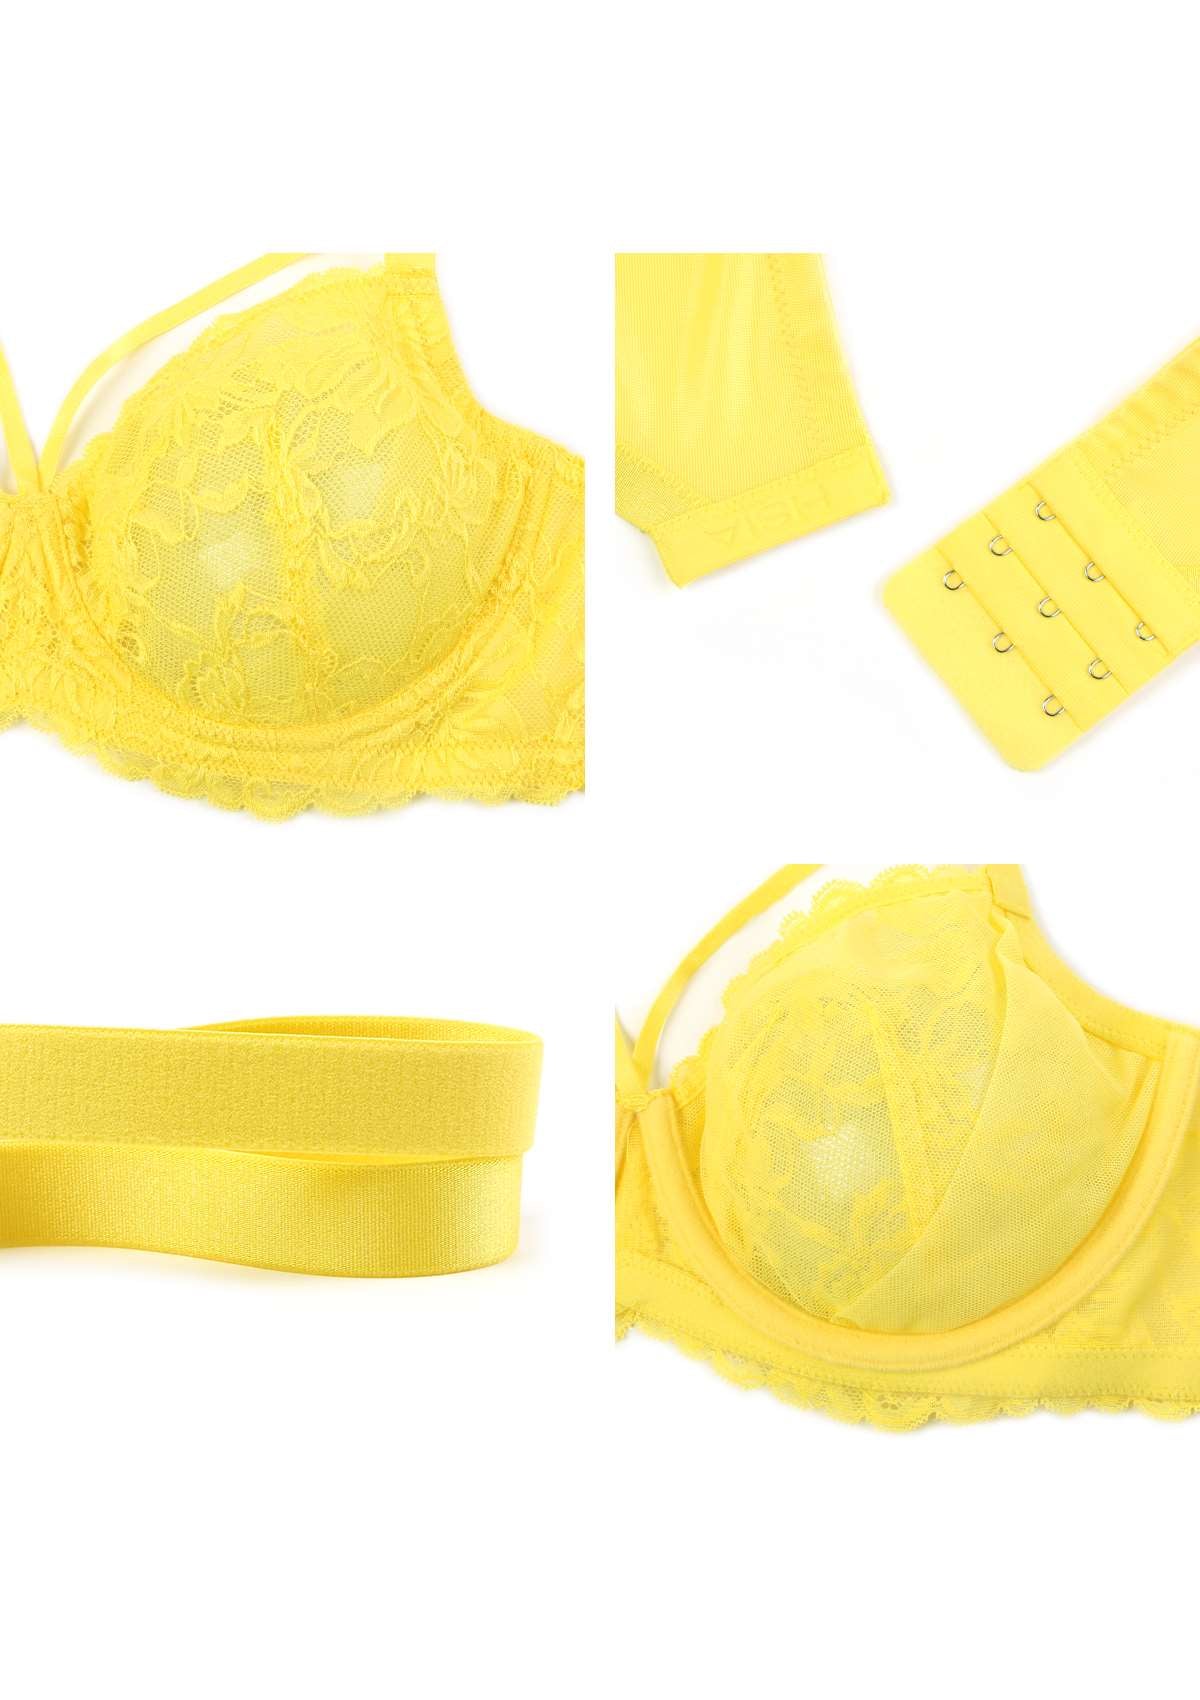 HSIA Unlined Lace Mesh Minimizer Bra For Large Breasts, Full Coverage - Bright Yellow / 44 / DDD/F